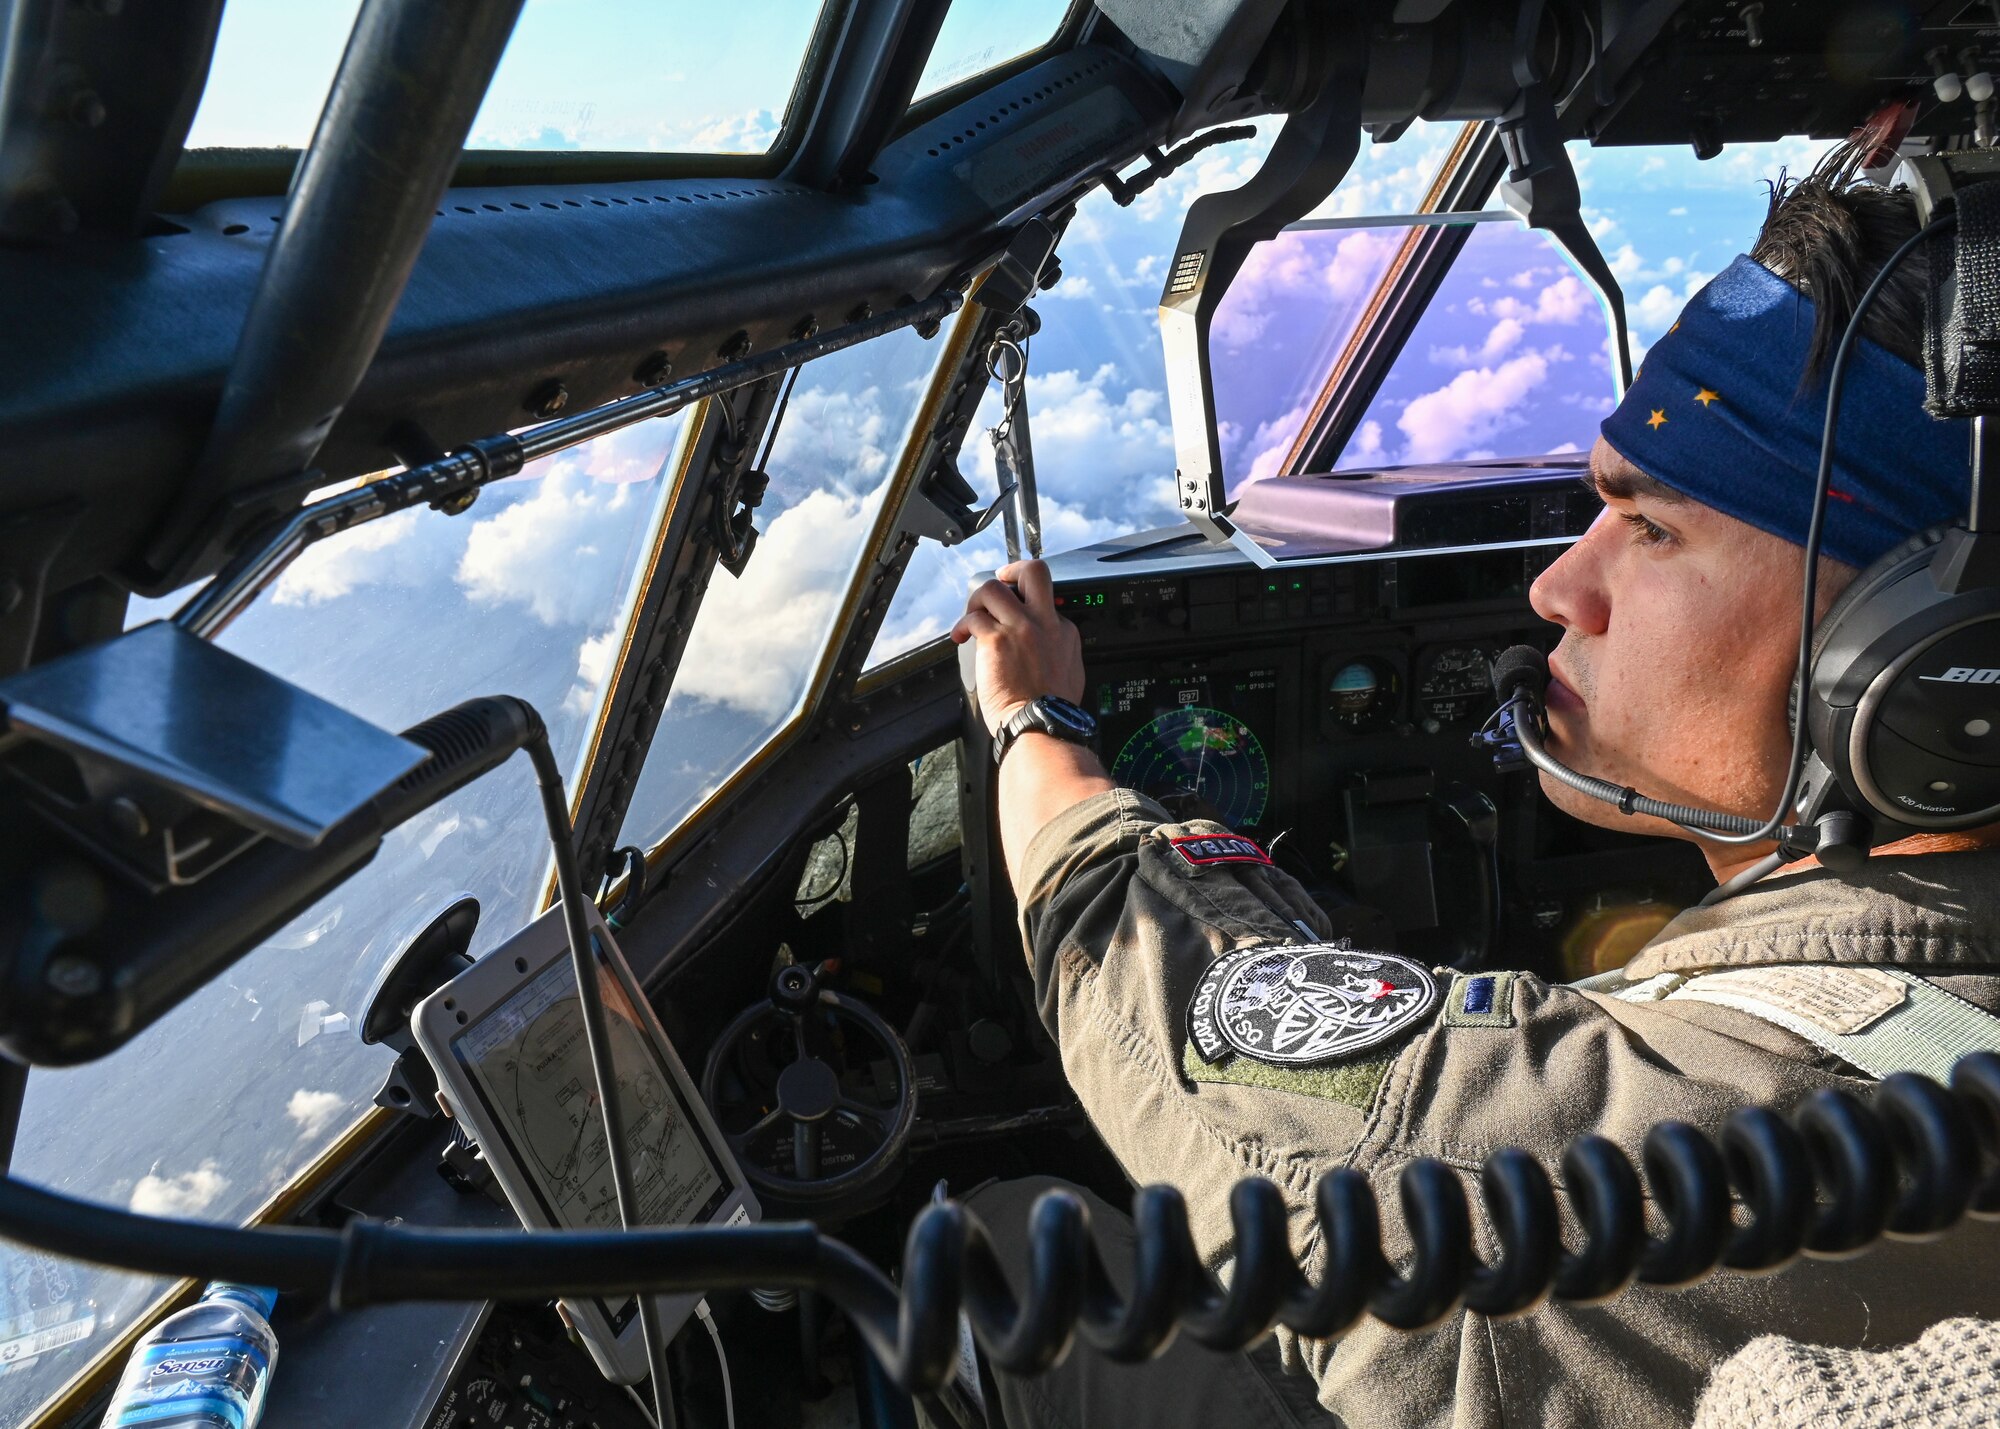 U.S. Air Force 1st Lt. TJ Yonkauske, a pilot assigned to the 36th Airlift Squadron, Yokota Air Base, Japan, prepares to land a U.S. Air Force C-130J during the last day of flights to drop bundles during Operation Christmas Drop at Andersen Air Force Base, Dec. 10, 2021. OCD is the Department of Defense’s longest-running humanitarian airlift operation, beginning in 1952. Today, airdrop operations include more than 55 islands throughout the Pacific. (U.S. Air Force photo by Senior Airman Aubree Owens)